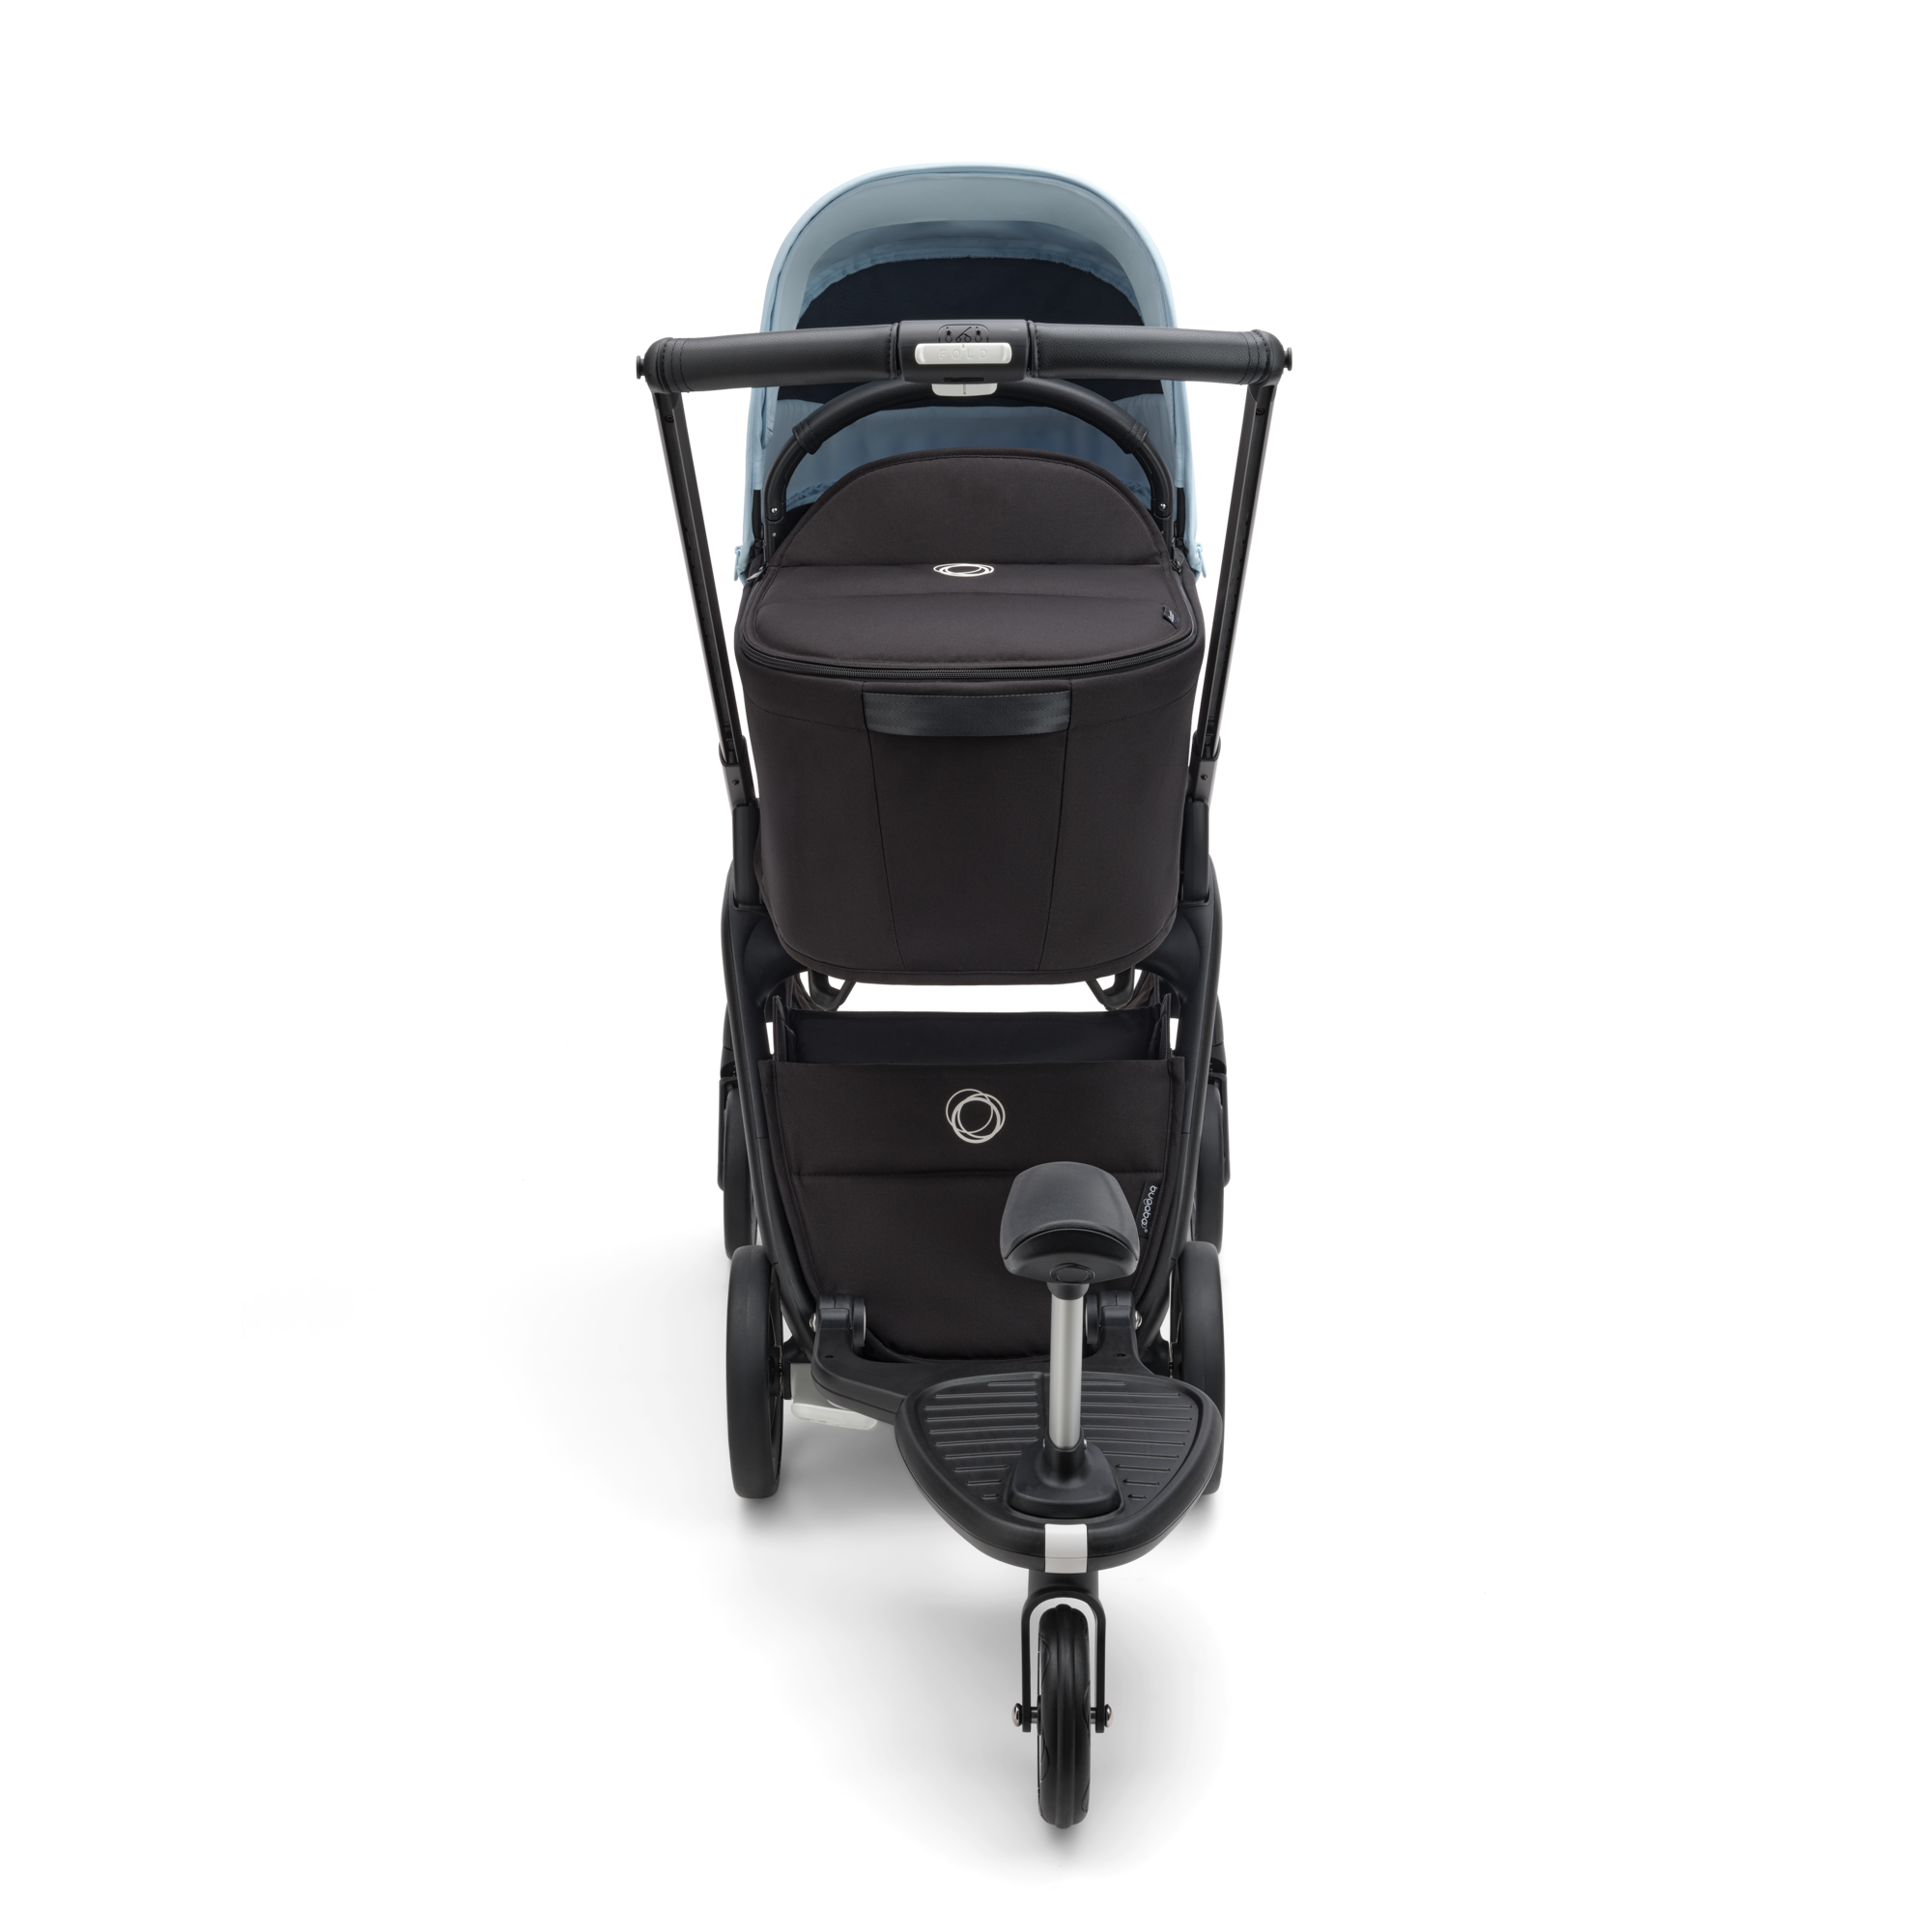 https://www.bugaboo.com/on/demandware.static/-/Sites-bugaboo-master/default/dw138ec412/images/85600WB01/Bugaboo-accessory-comfort-wheeled-board-x-85600WB01-06.png